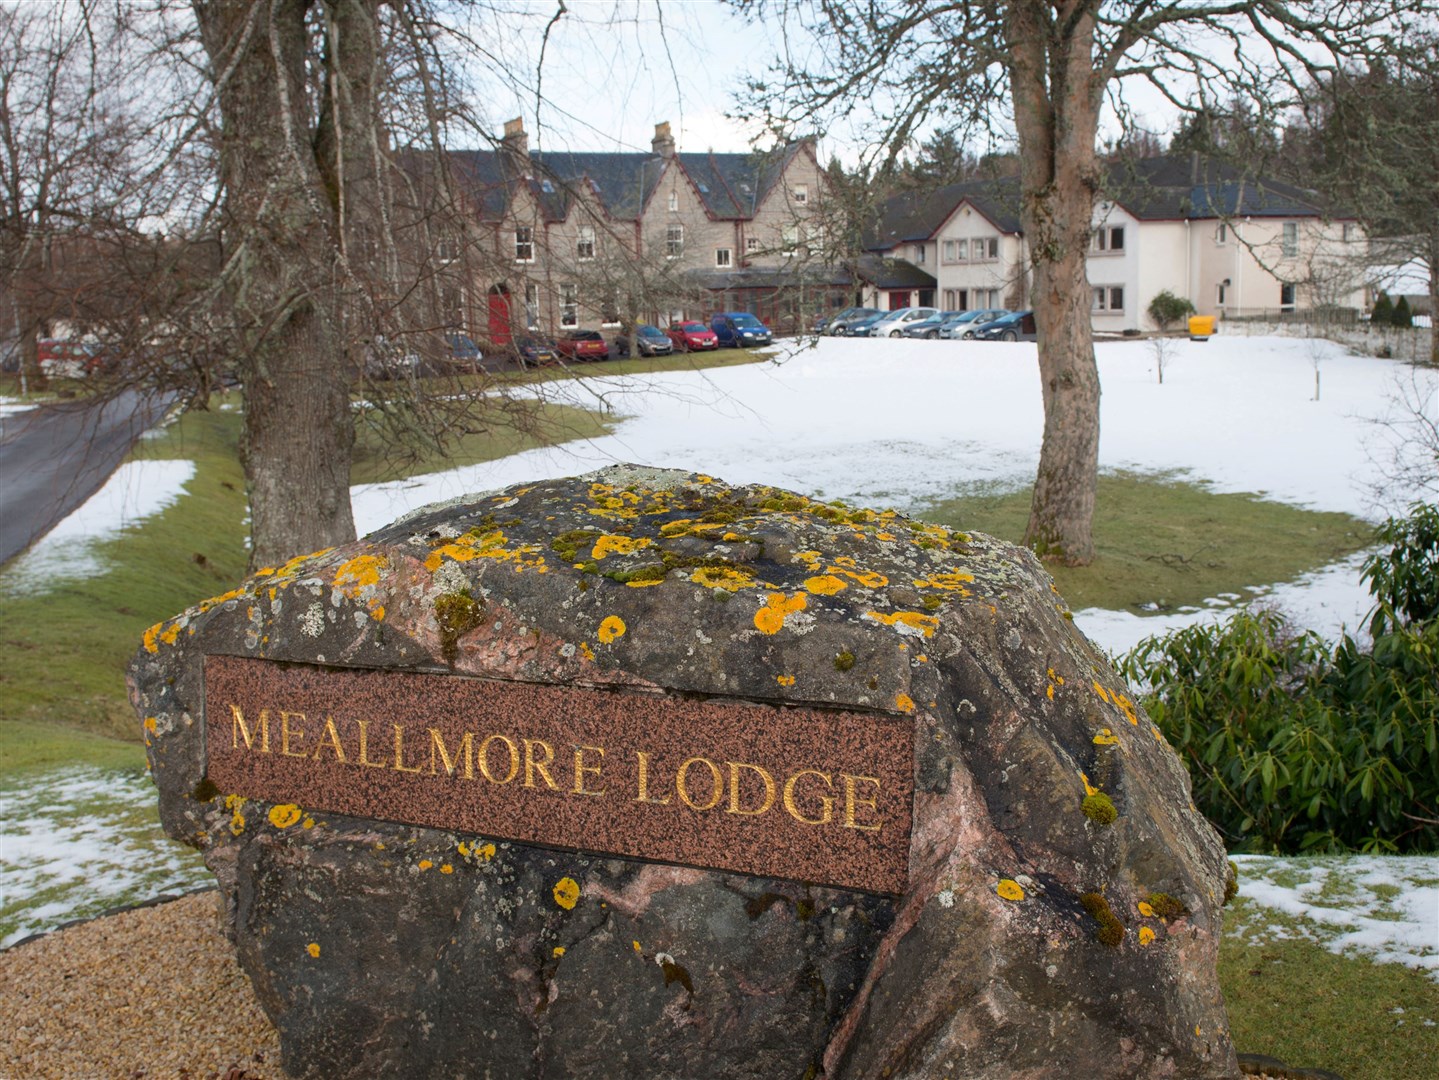 Meallmore Lodge at one time served Strathspey until more care homes places were created.